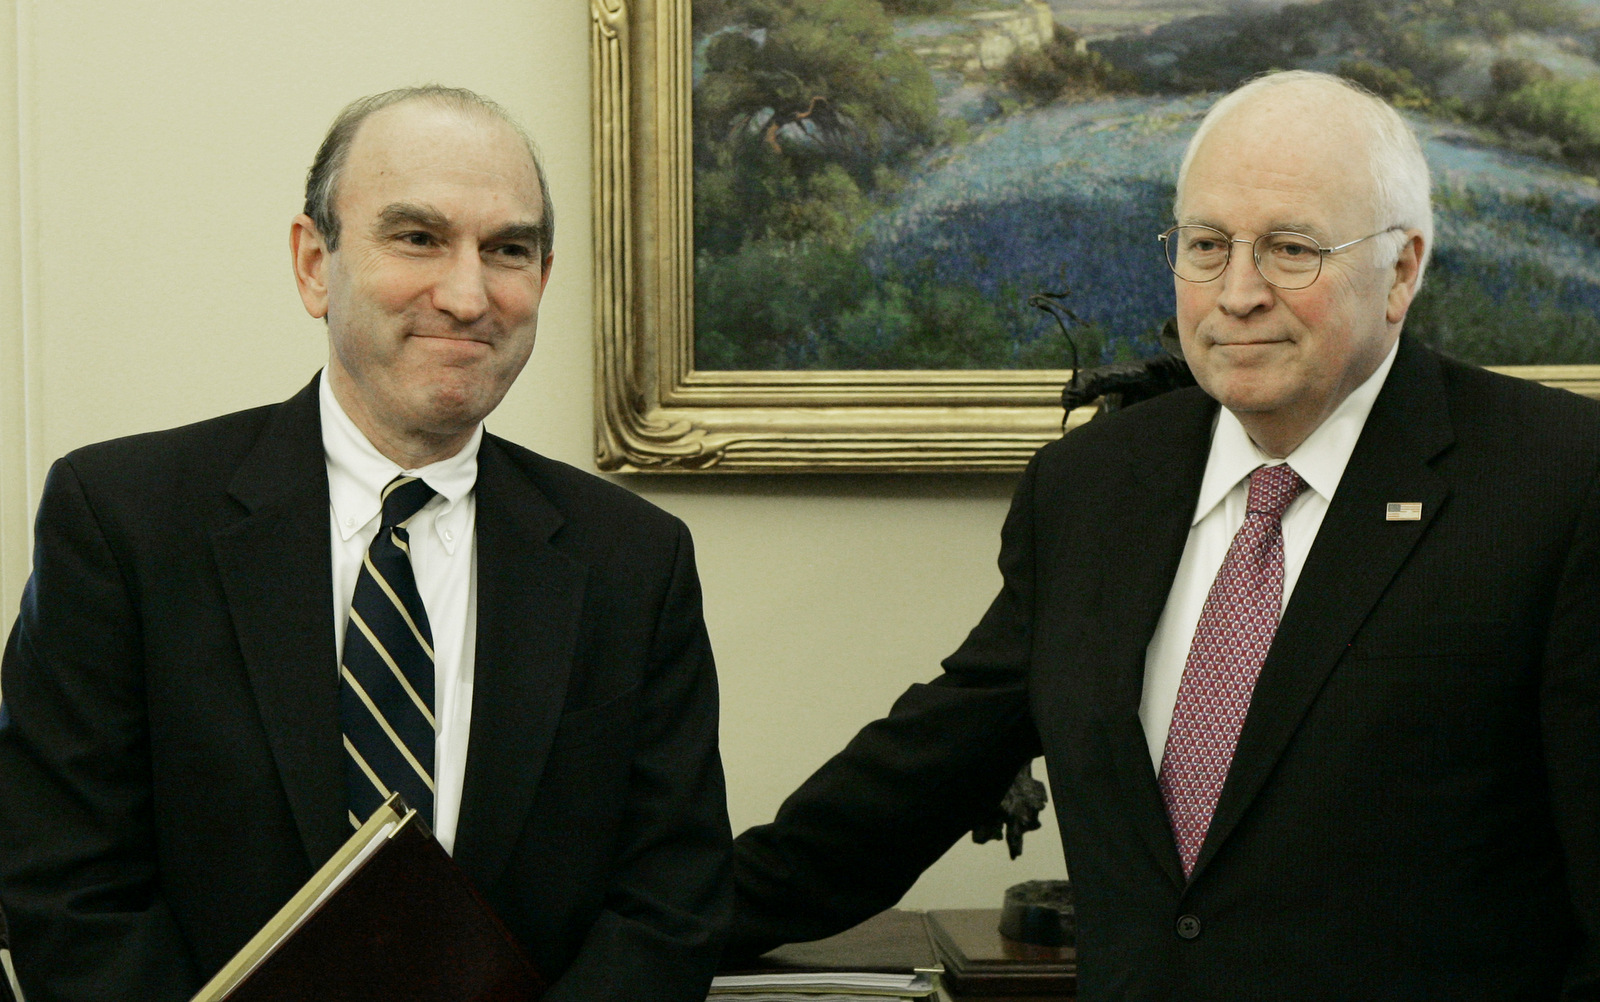 Former Vice President Dick Cheney, right, poses with former Deputy National Security Adviser Elliott Abrams in the Oval Office at the White House in Washington, Wednesday, May 2, 2007. (AP/Charles Dharapak)